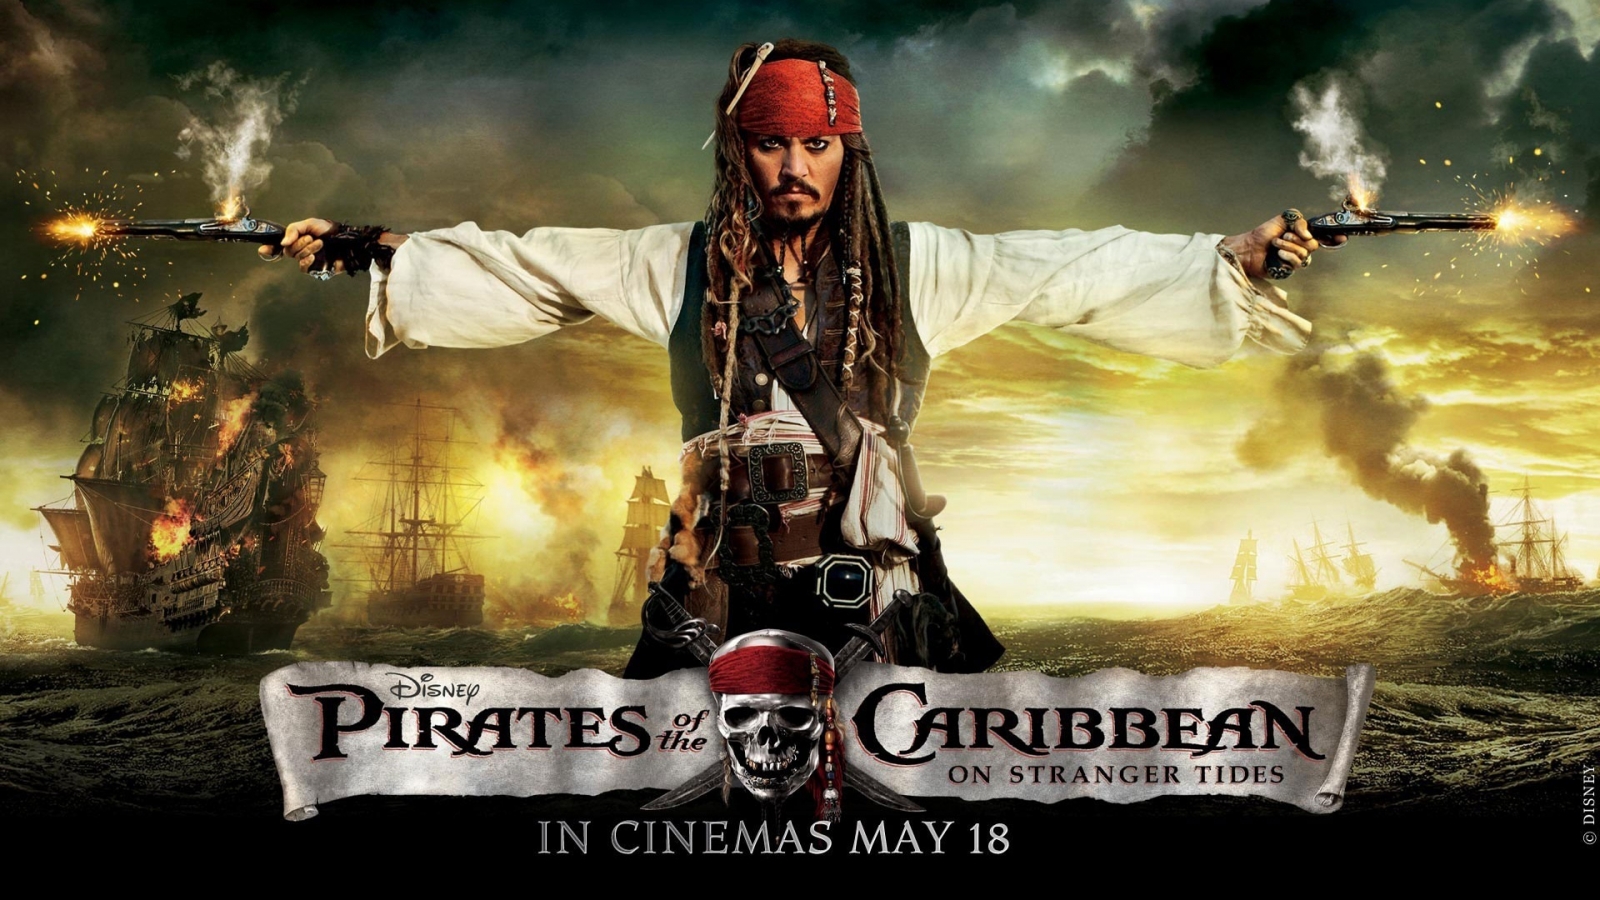 Pirates of the Caribbean 4 Poster for 1600 x 900 HDTV resolution